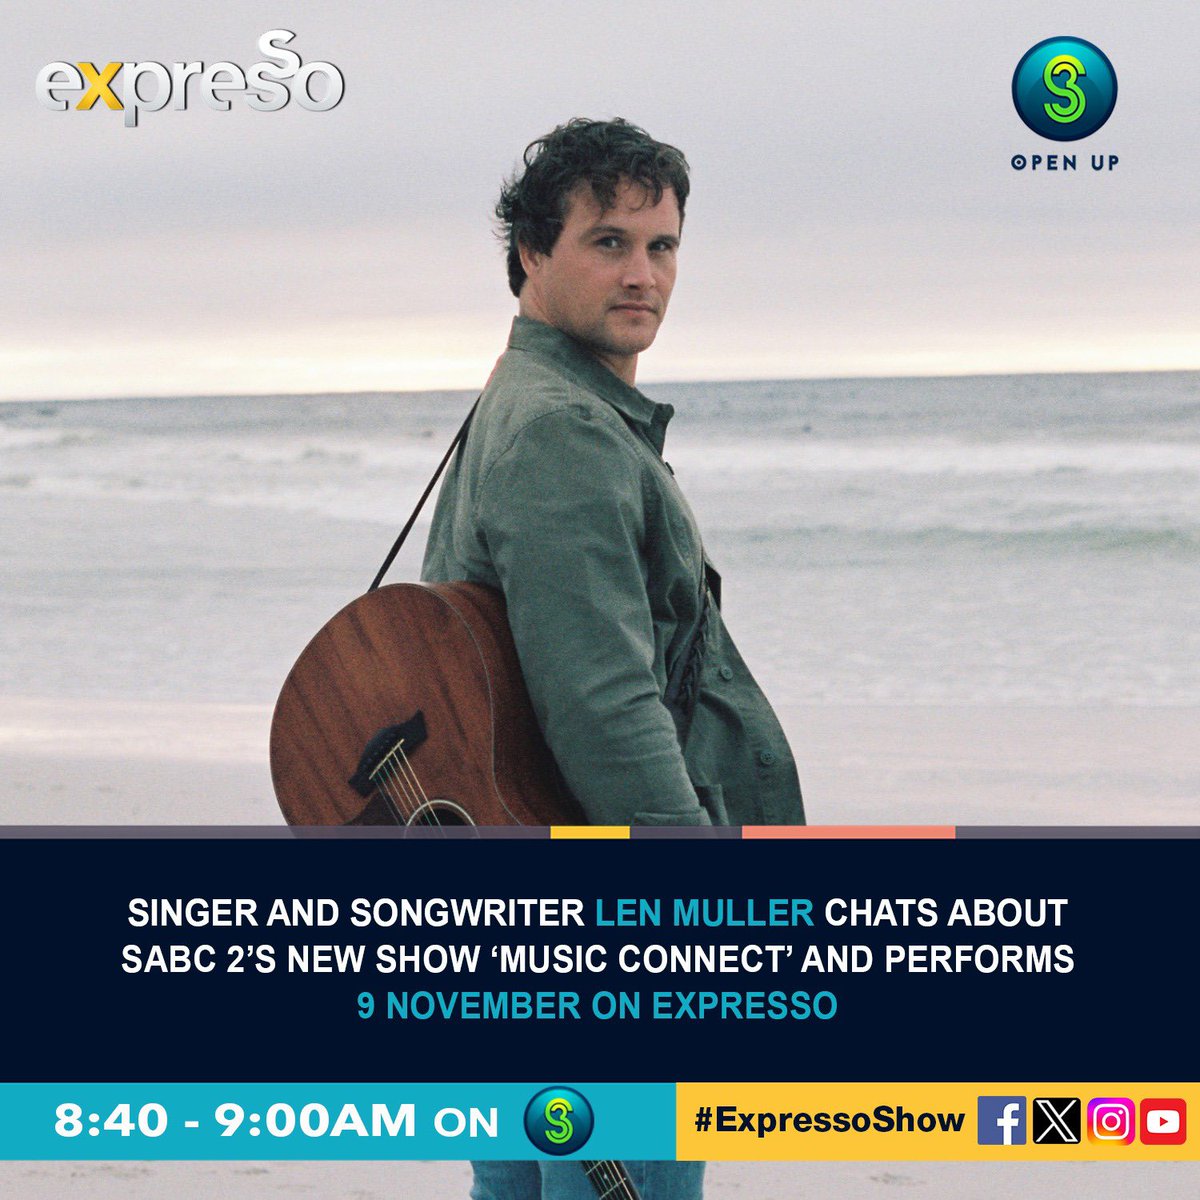 Catch Len Muller performing live on #ExpressoShow tomorrow 6-9AM on @SABC3